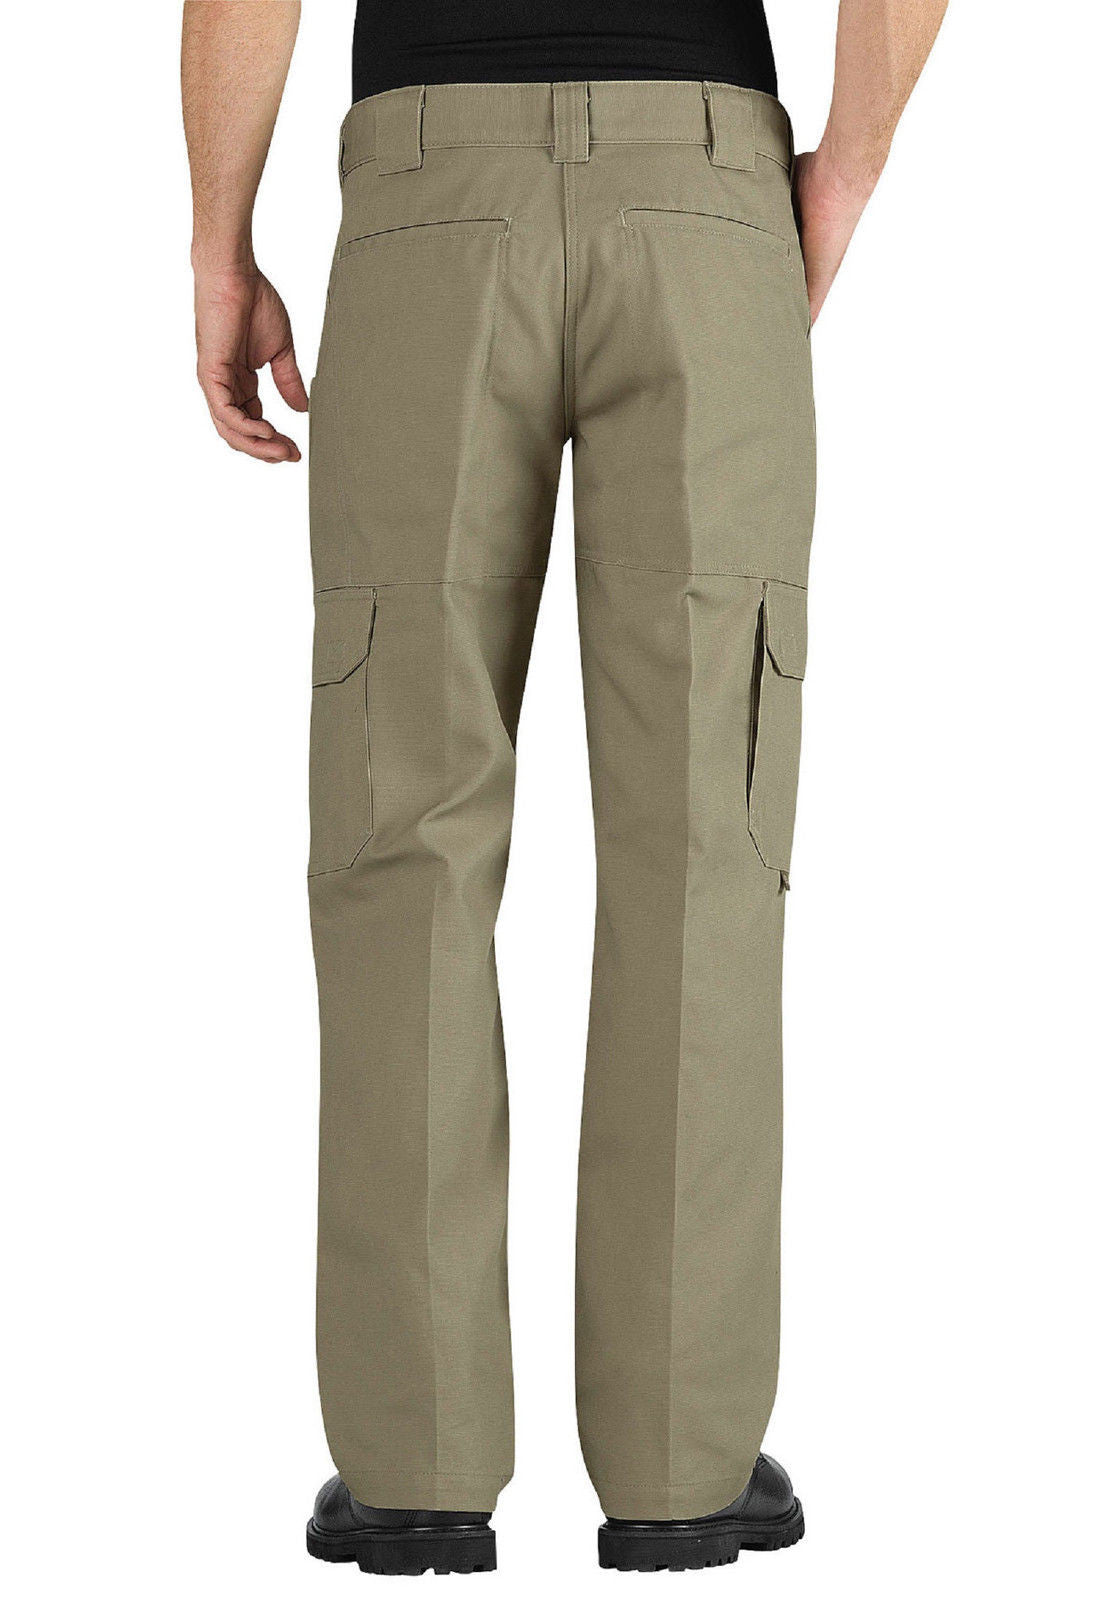 Dickies Men's Relaxed Fit Canvas Tactical Pant - Field Duty Cargo Uniform Pants